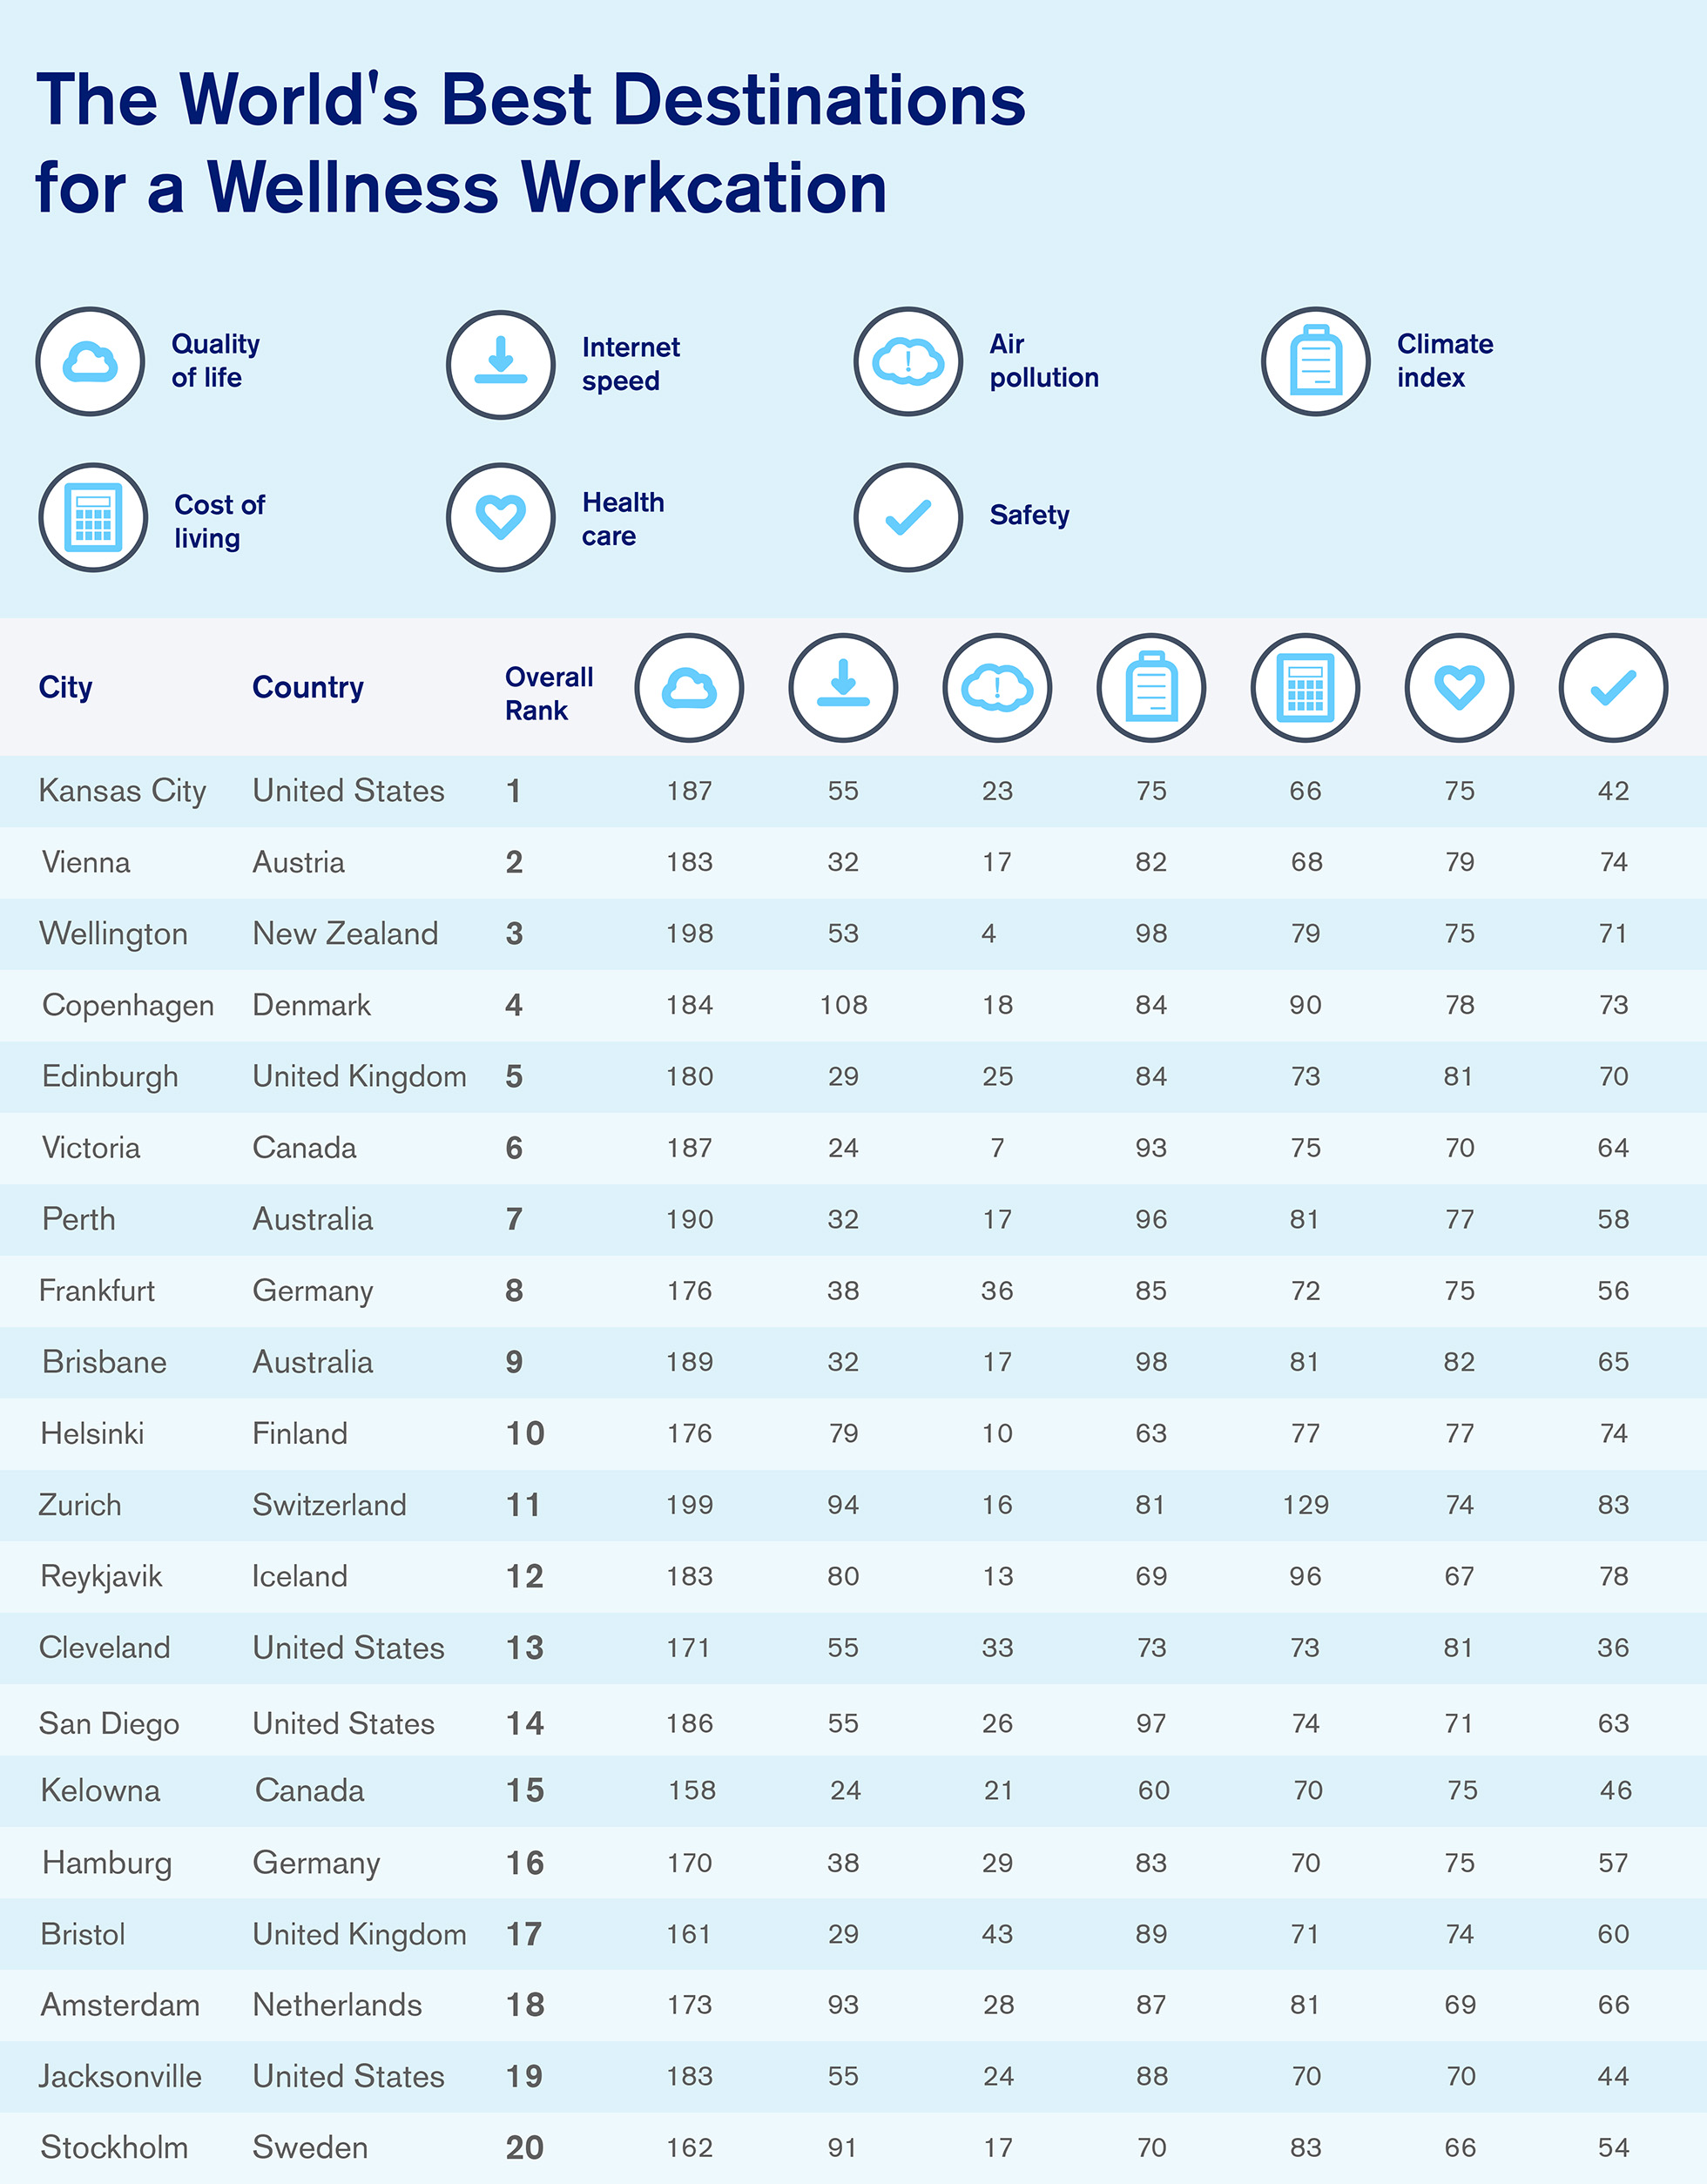 Ranking chart of the world's best destination's for a wellness workcation